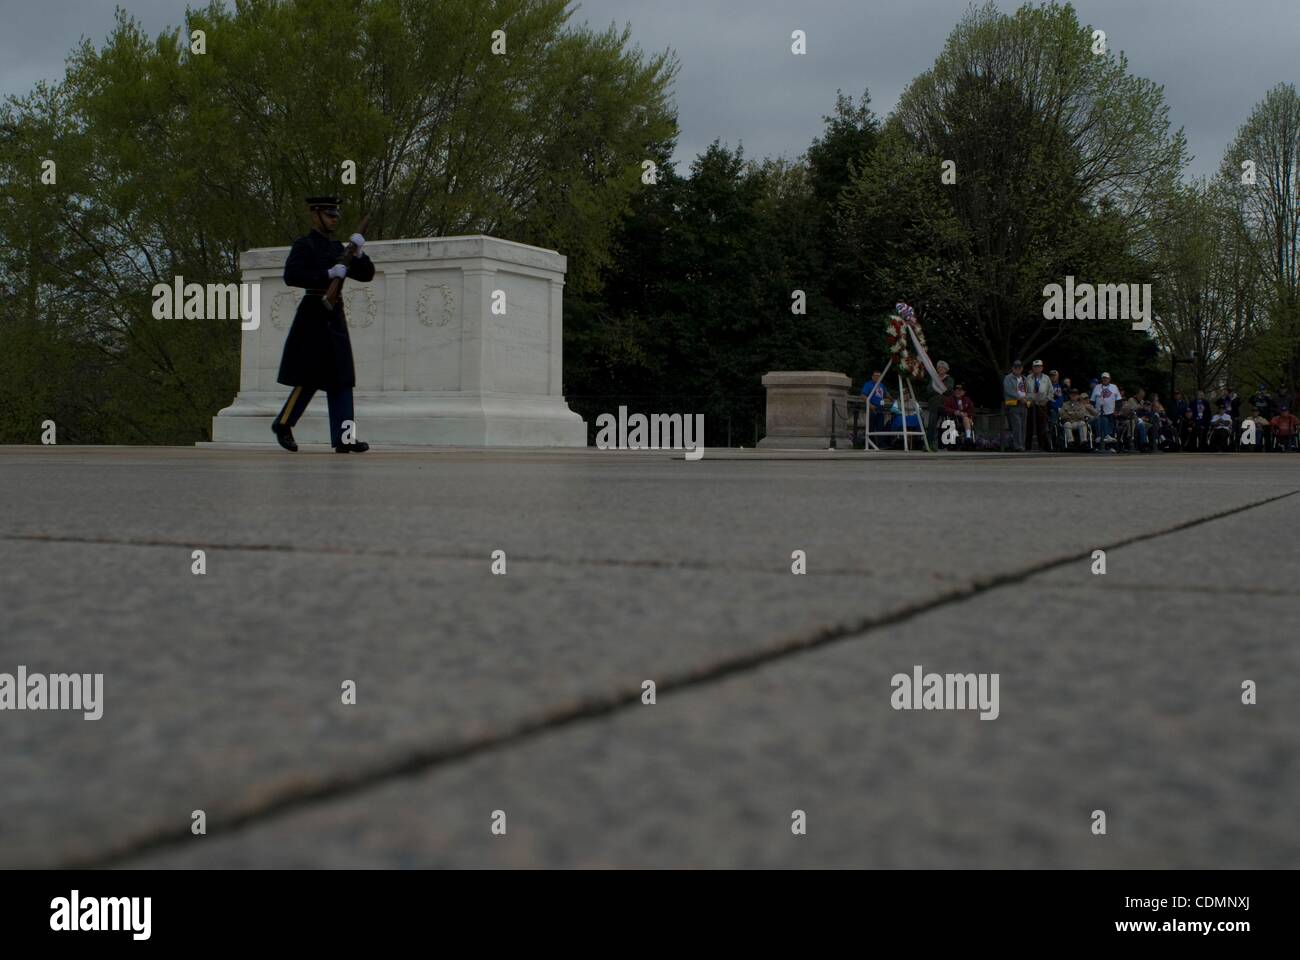 Apr 12, 2011 - Arlington, Virginia, U.S. - A U.S. Soldier with the 3rd U.S. Infantry Regiment, also known as The Old Guard, stands guard at the Tomb of the Unknowns at Arlington National Cemetery. The Old Guard has guarded the tomb since 1948. Arlington National Cememterywas established during the A Stock Photo